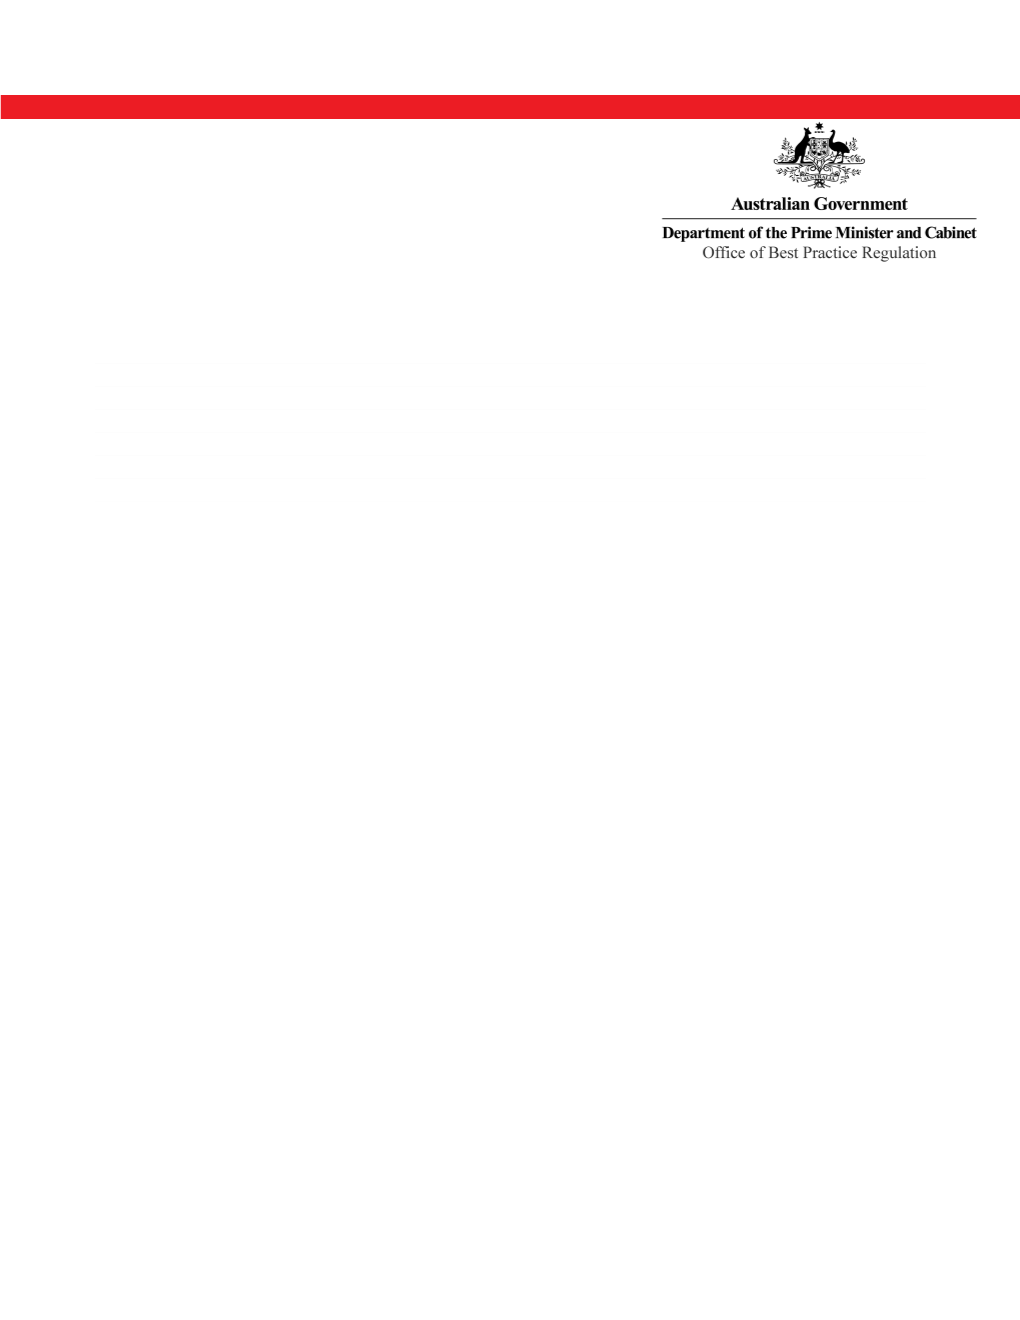 User Guide to the Australian Government Guide to Regulation